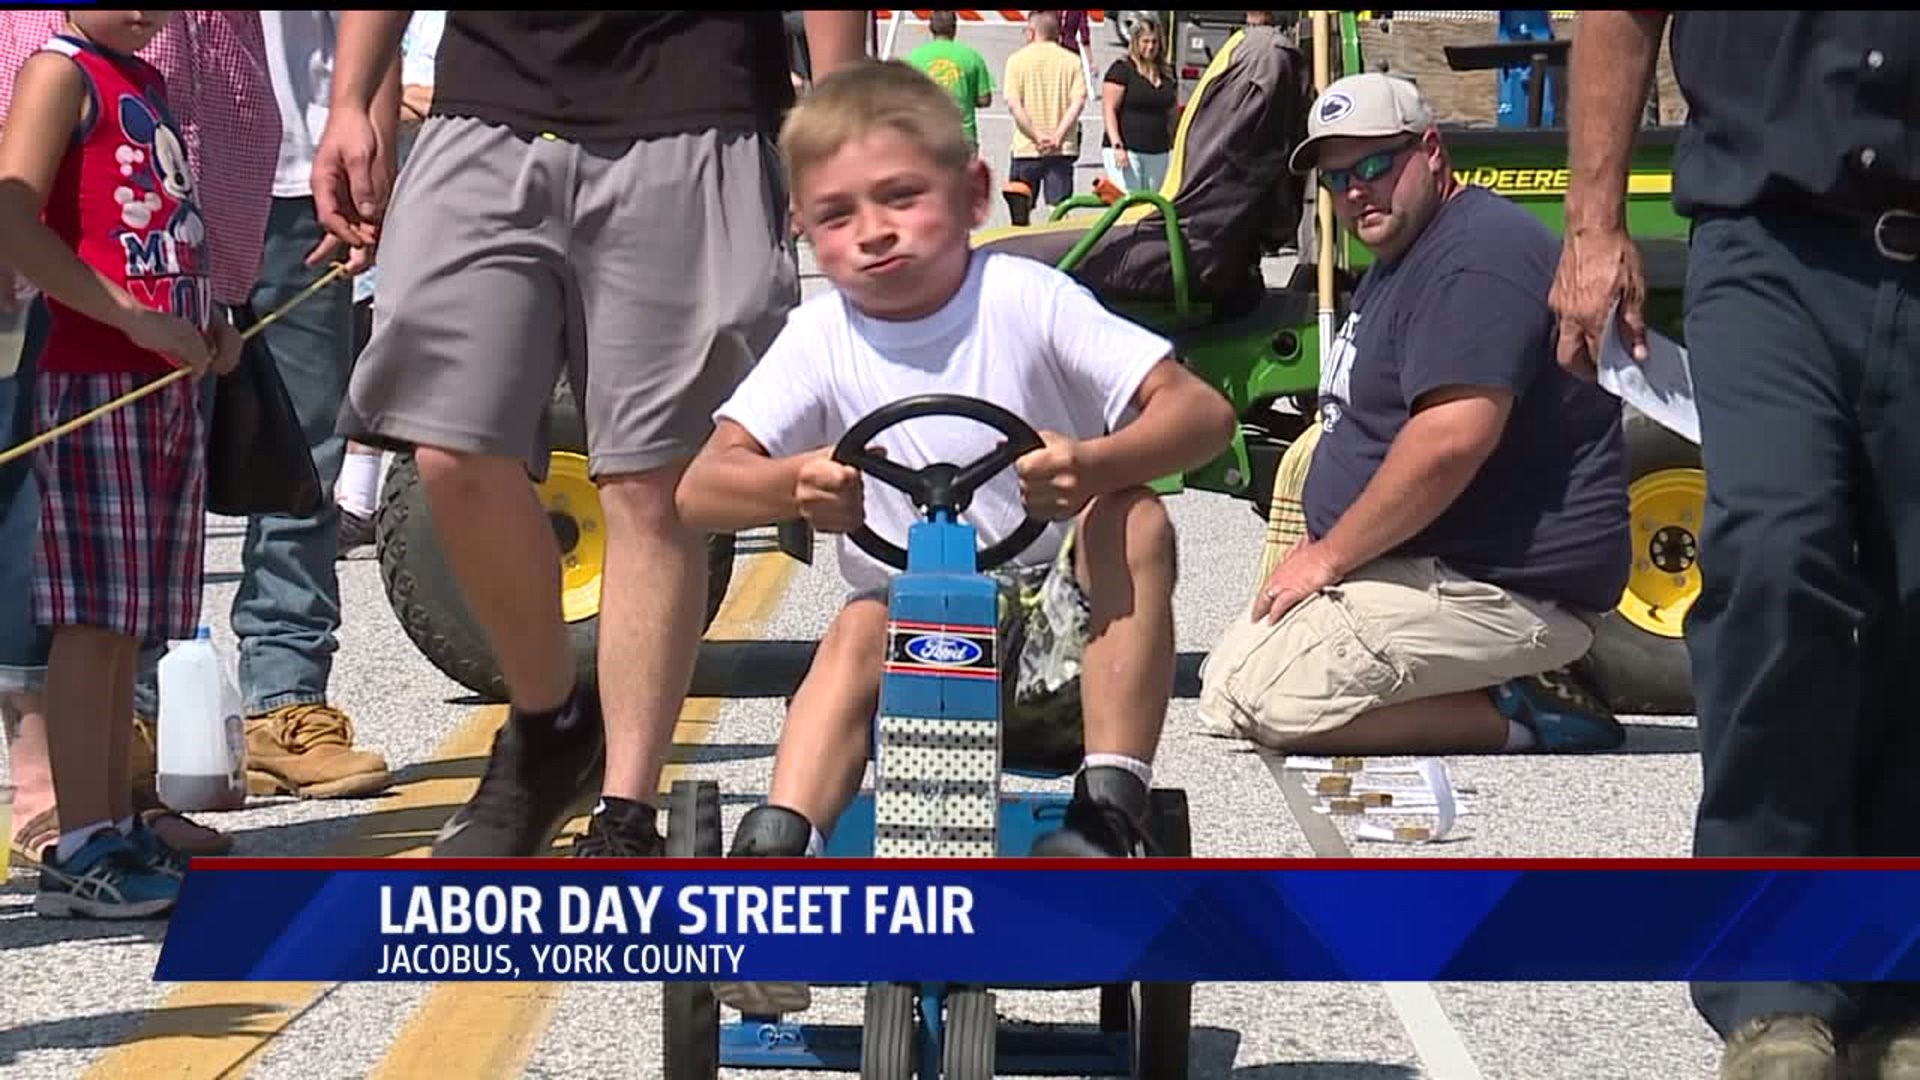 Labor Day street fair in Jacobus